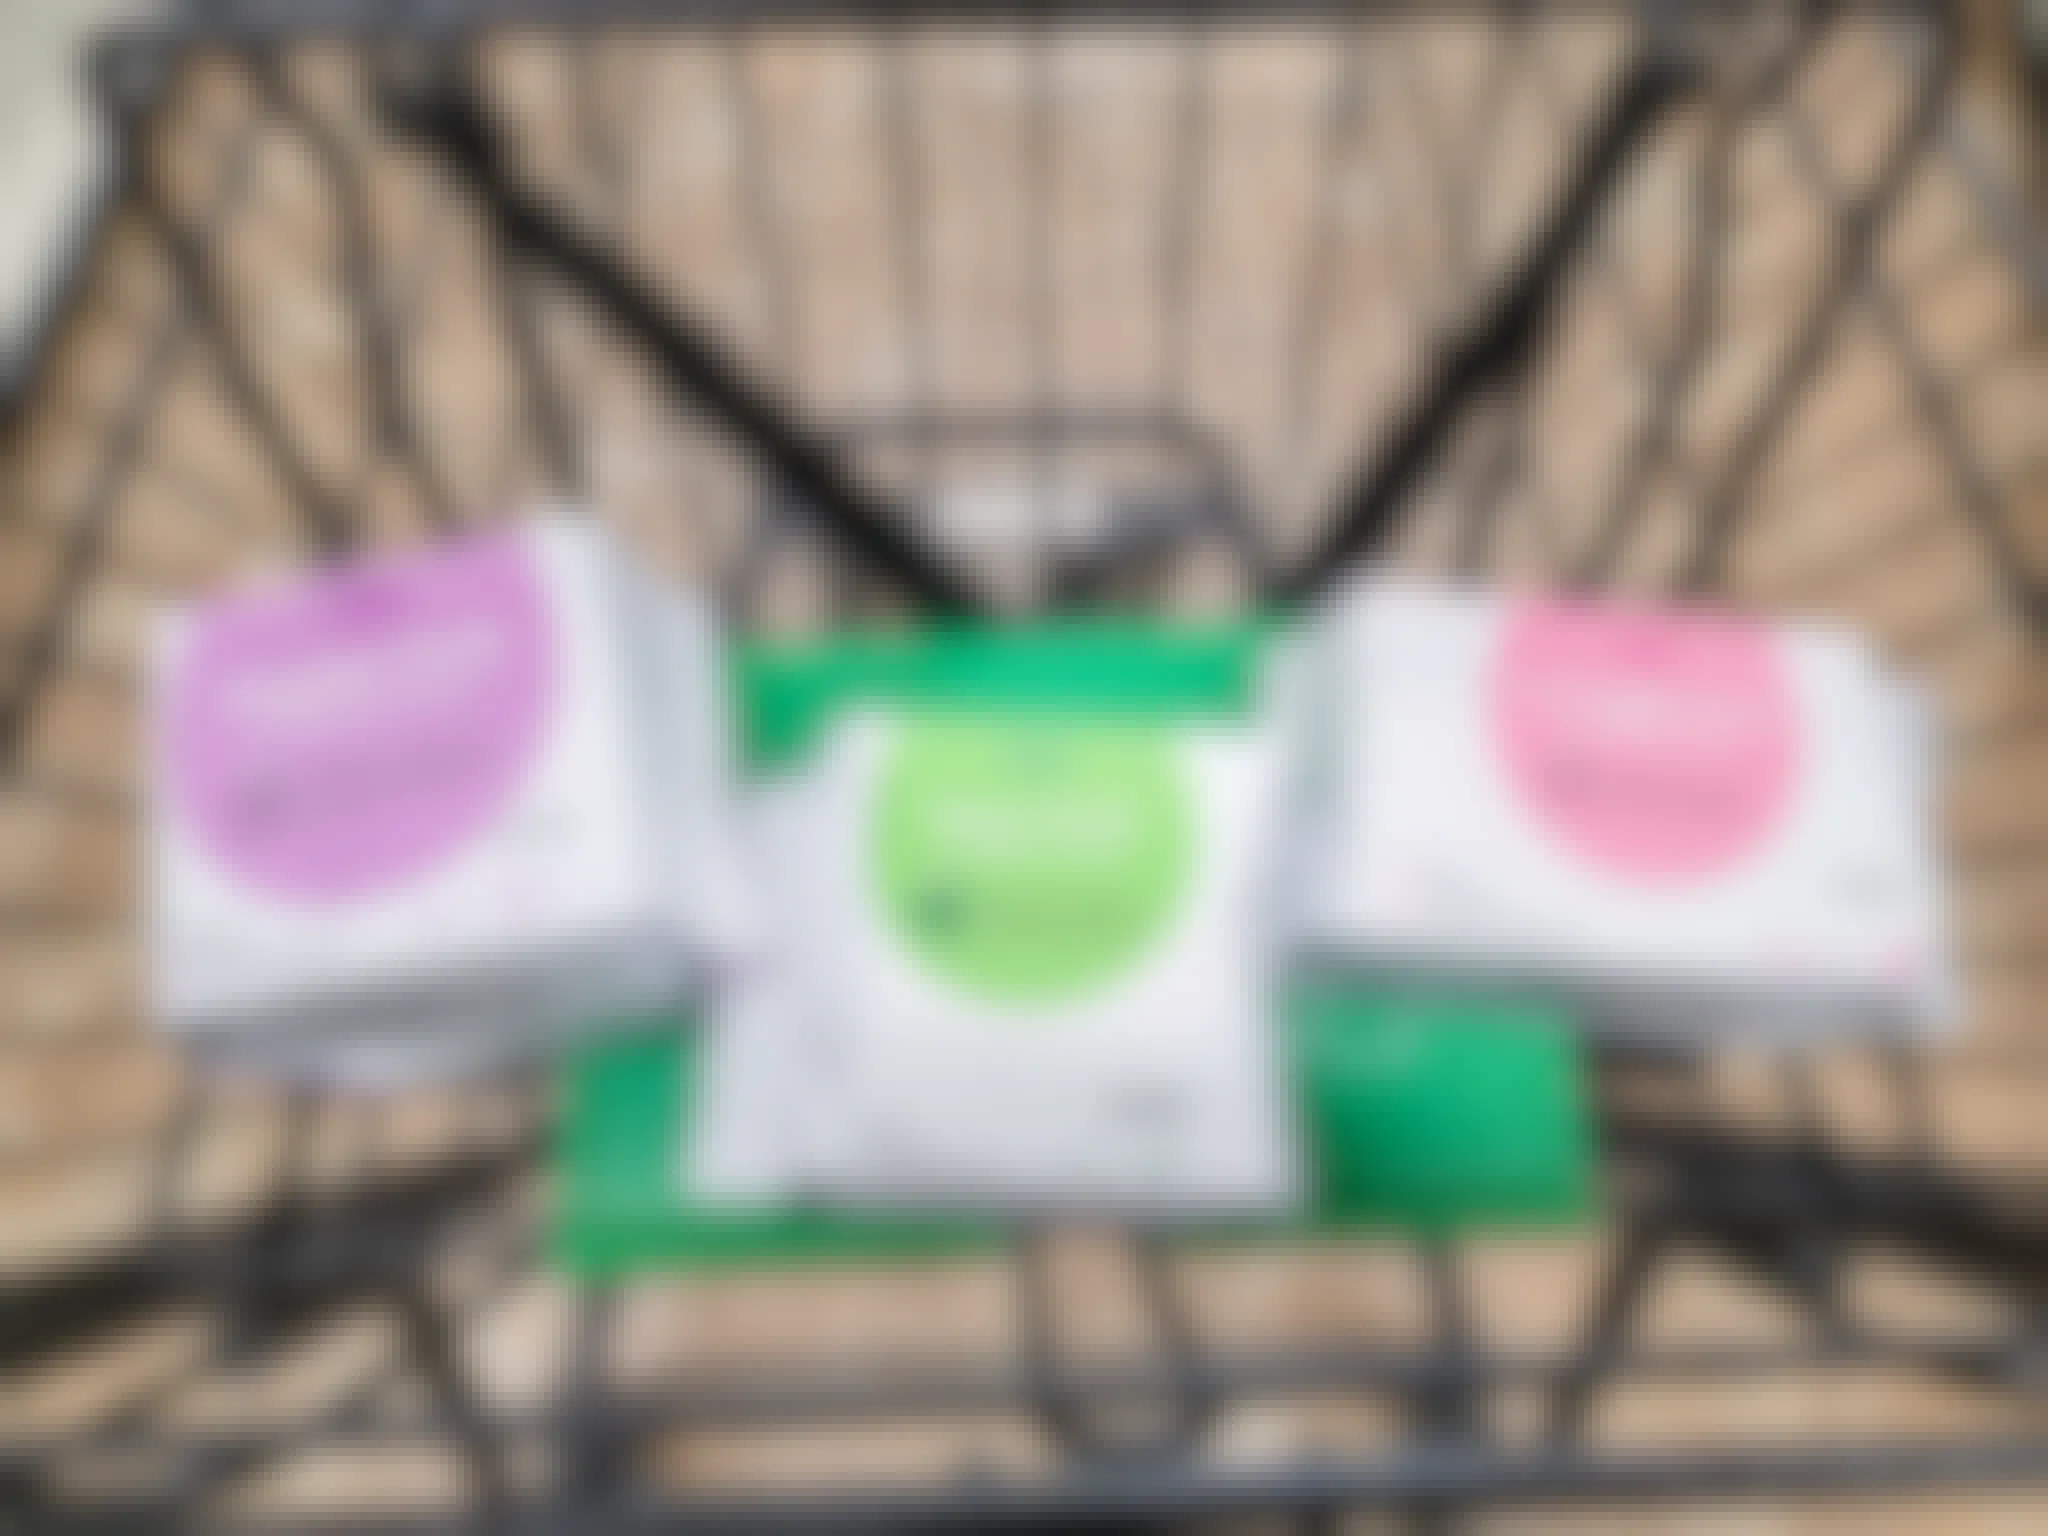 organic cotton pads in a cart